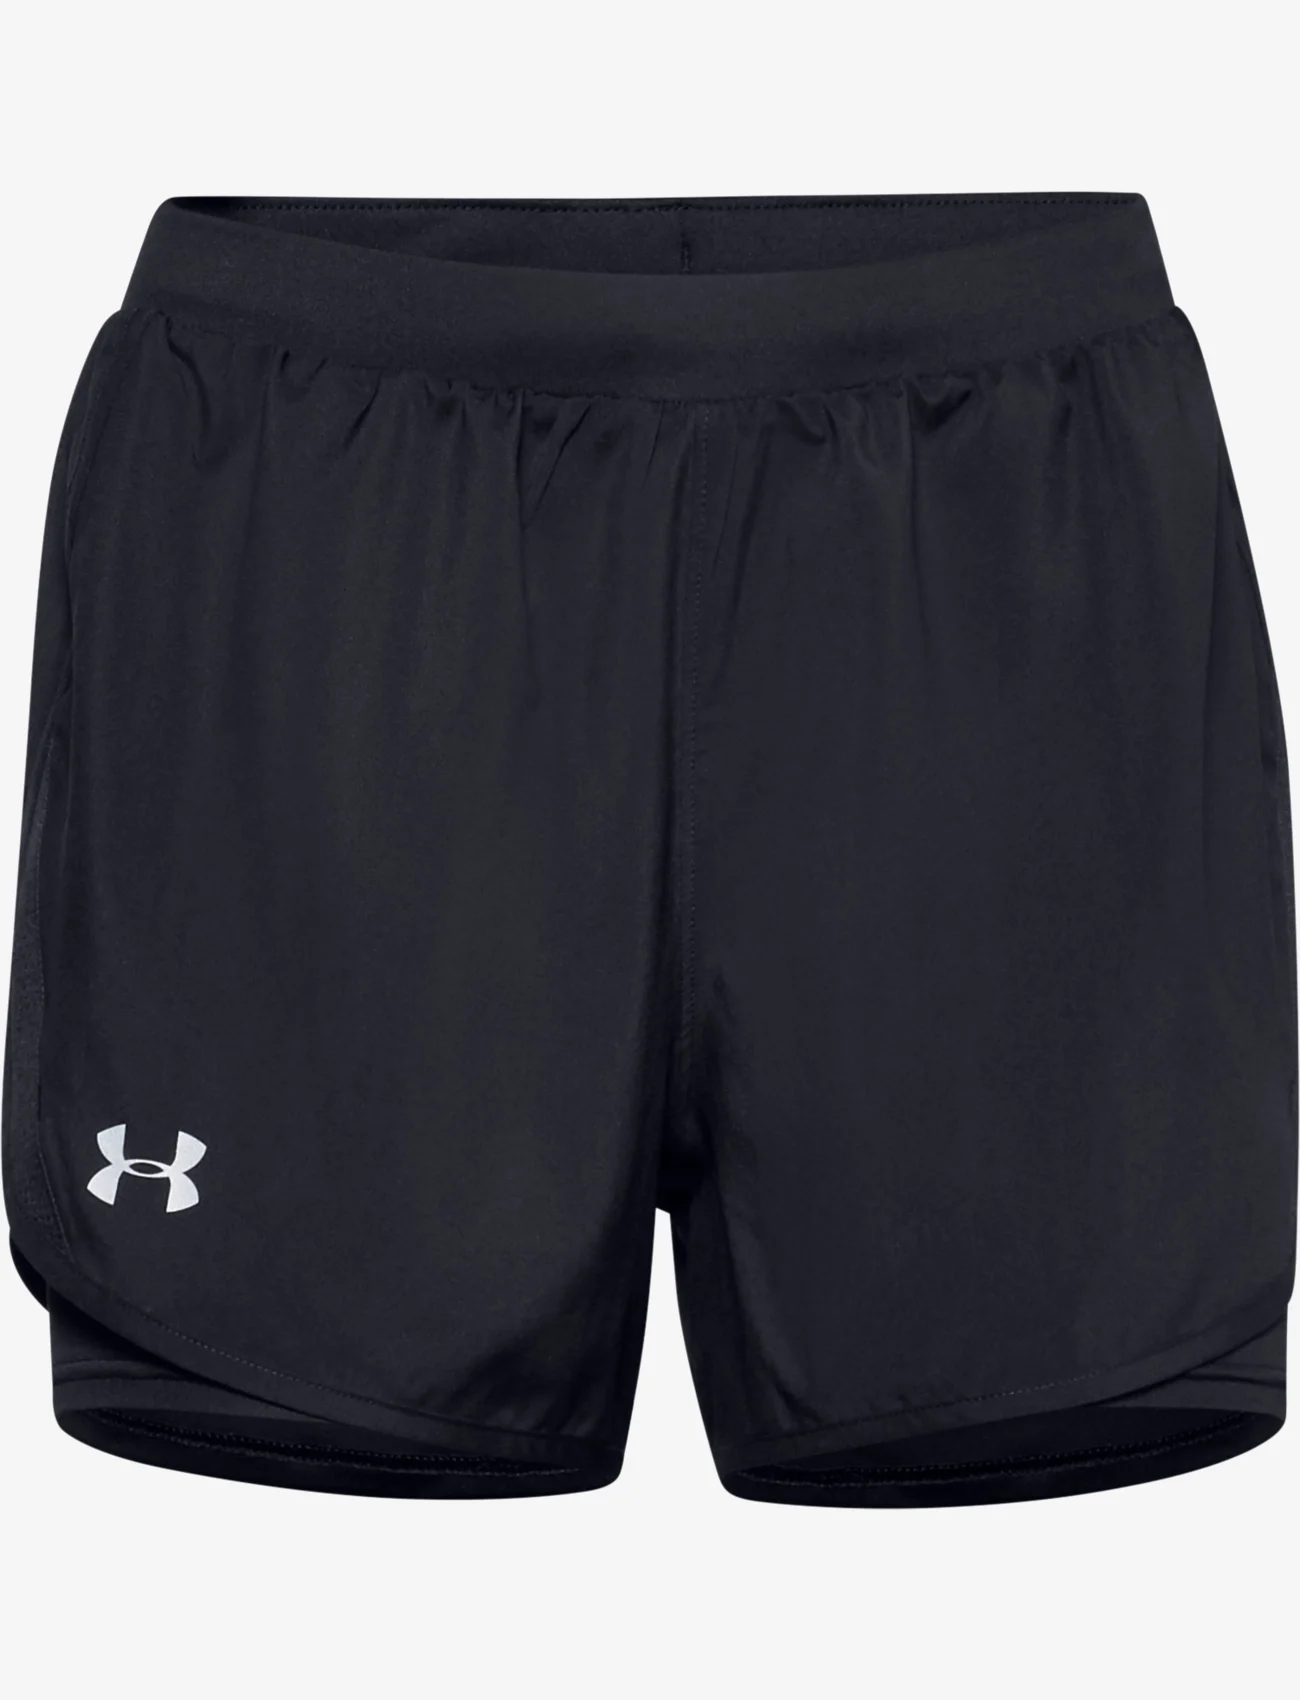 Under Armour - UA Fly By 2.0 2N1 Short - black - 0